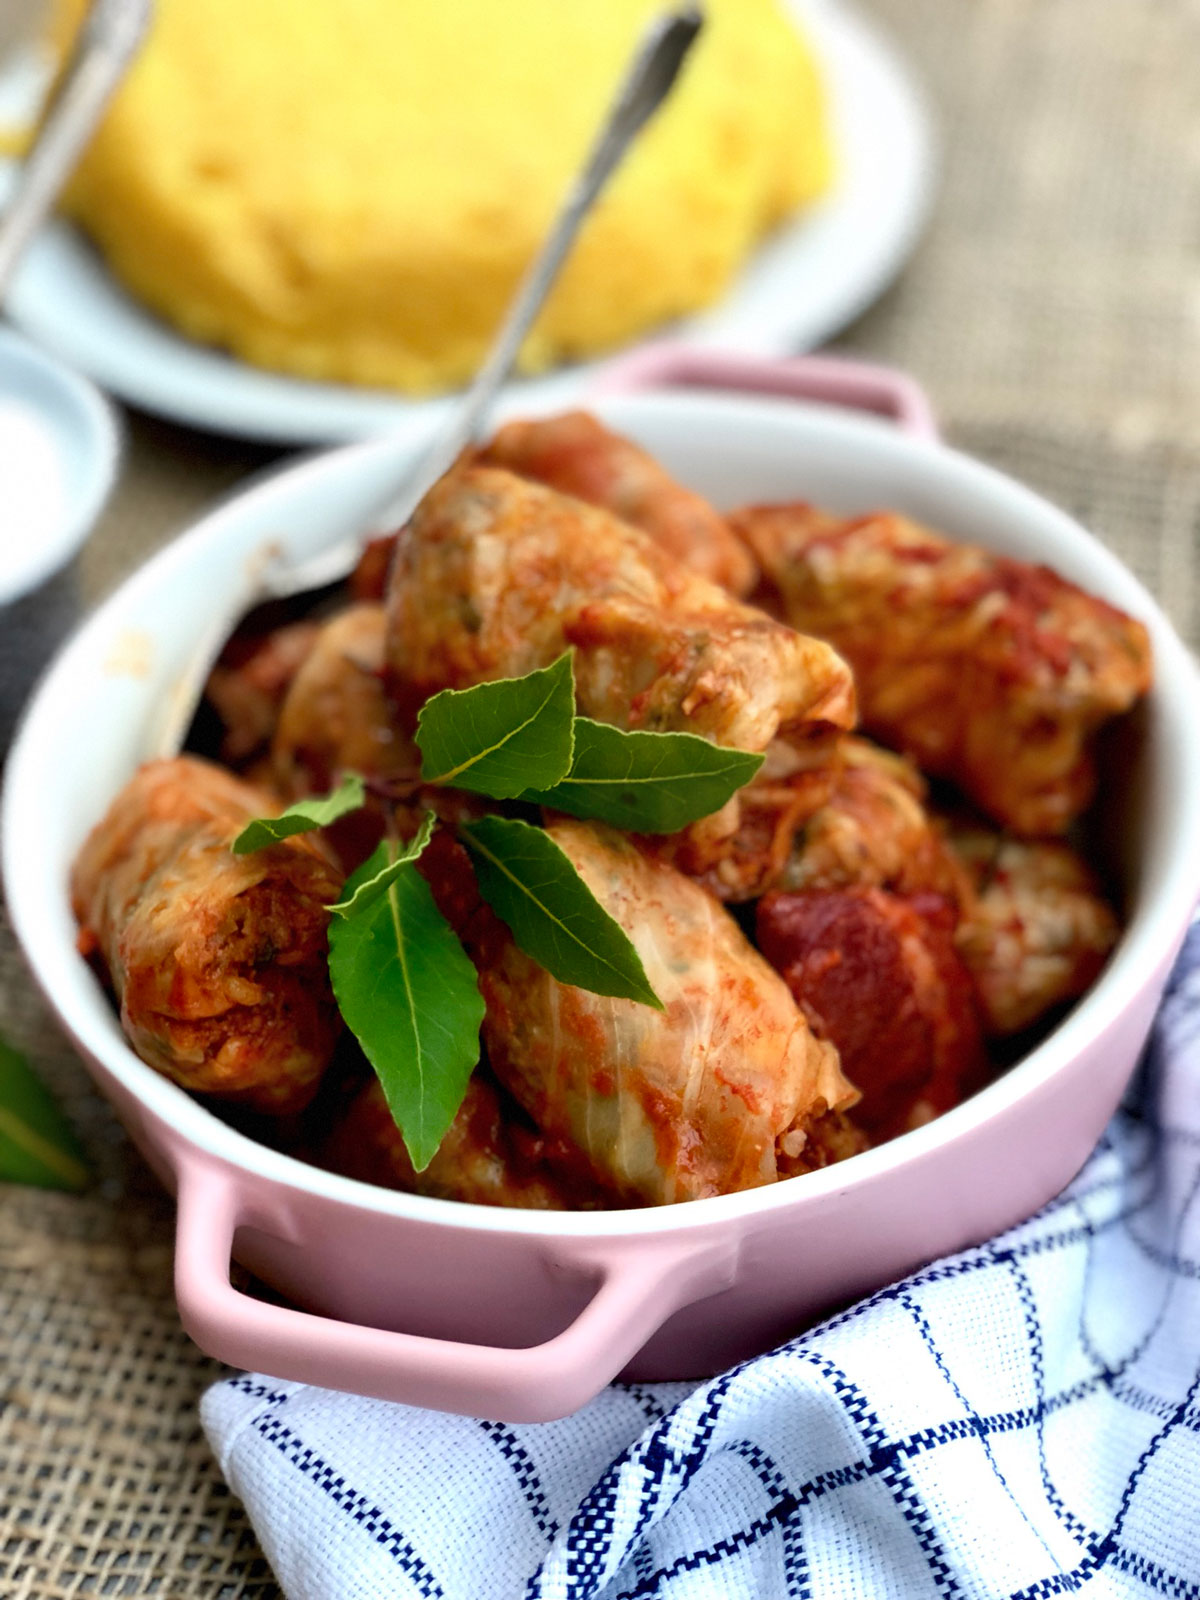 Cabbage rolls ‘sarmale’ stuffed with ground beef veggies and rice